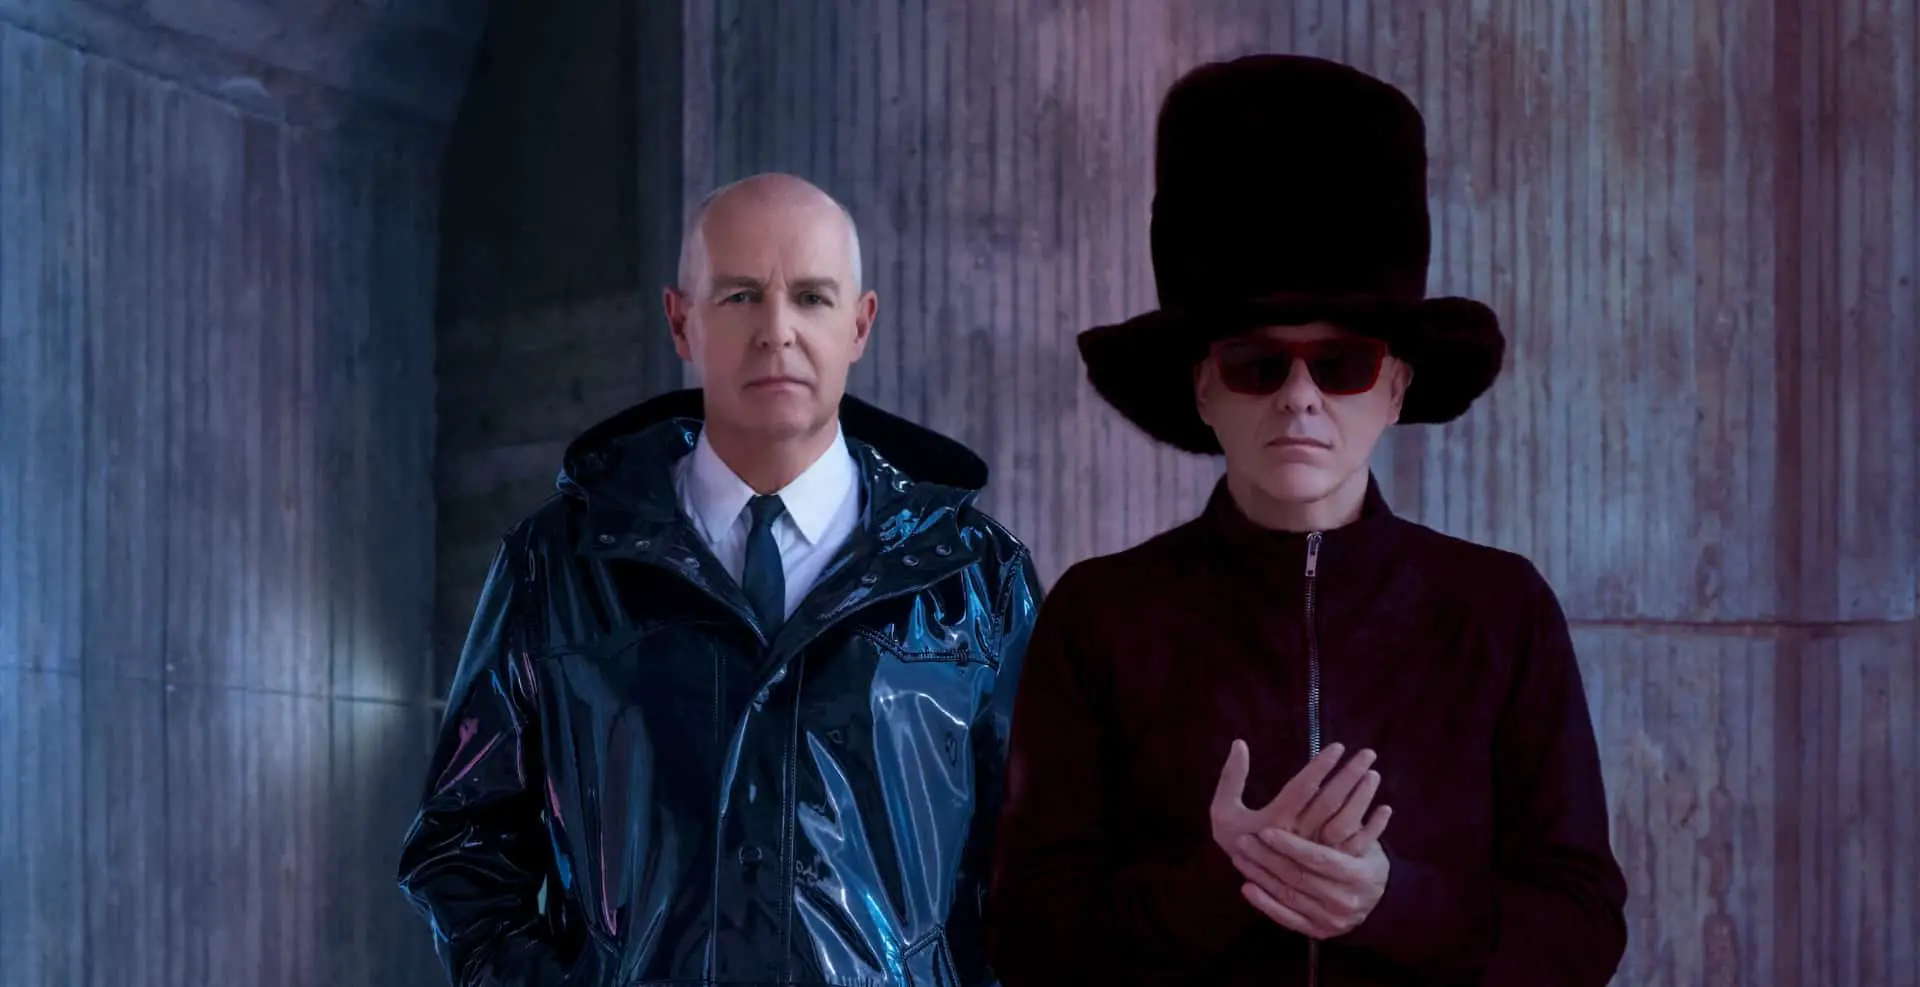 The two band members of Pet Shop Boys